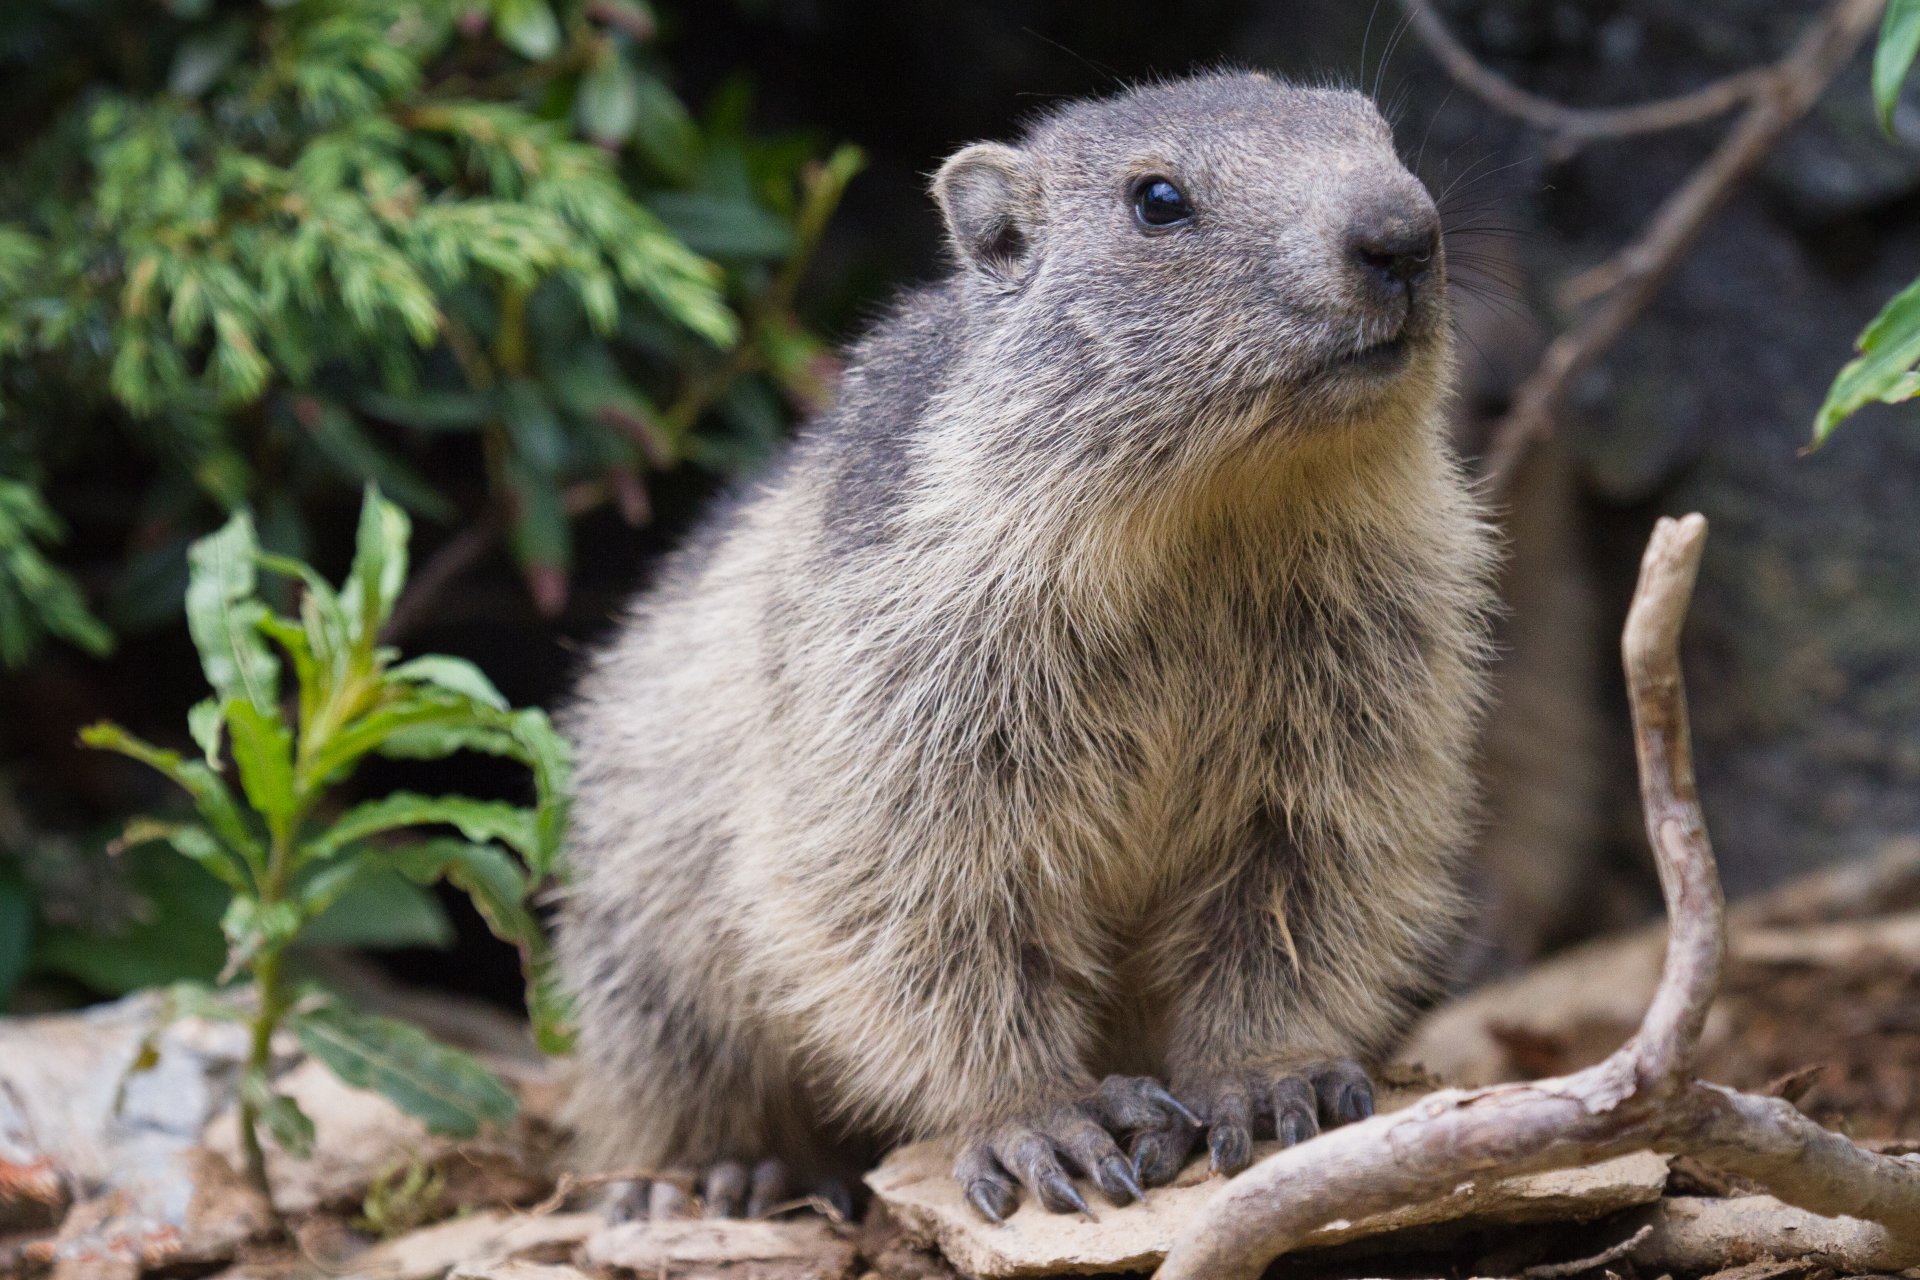 Marmot 4k Ultra HD Wallpaper and Background Image | 4876x3251 | ID:459536